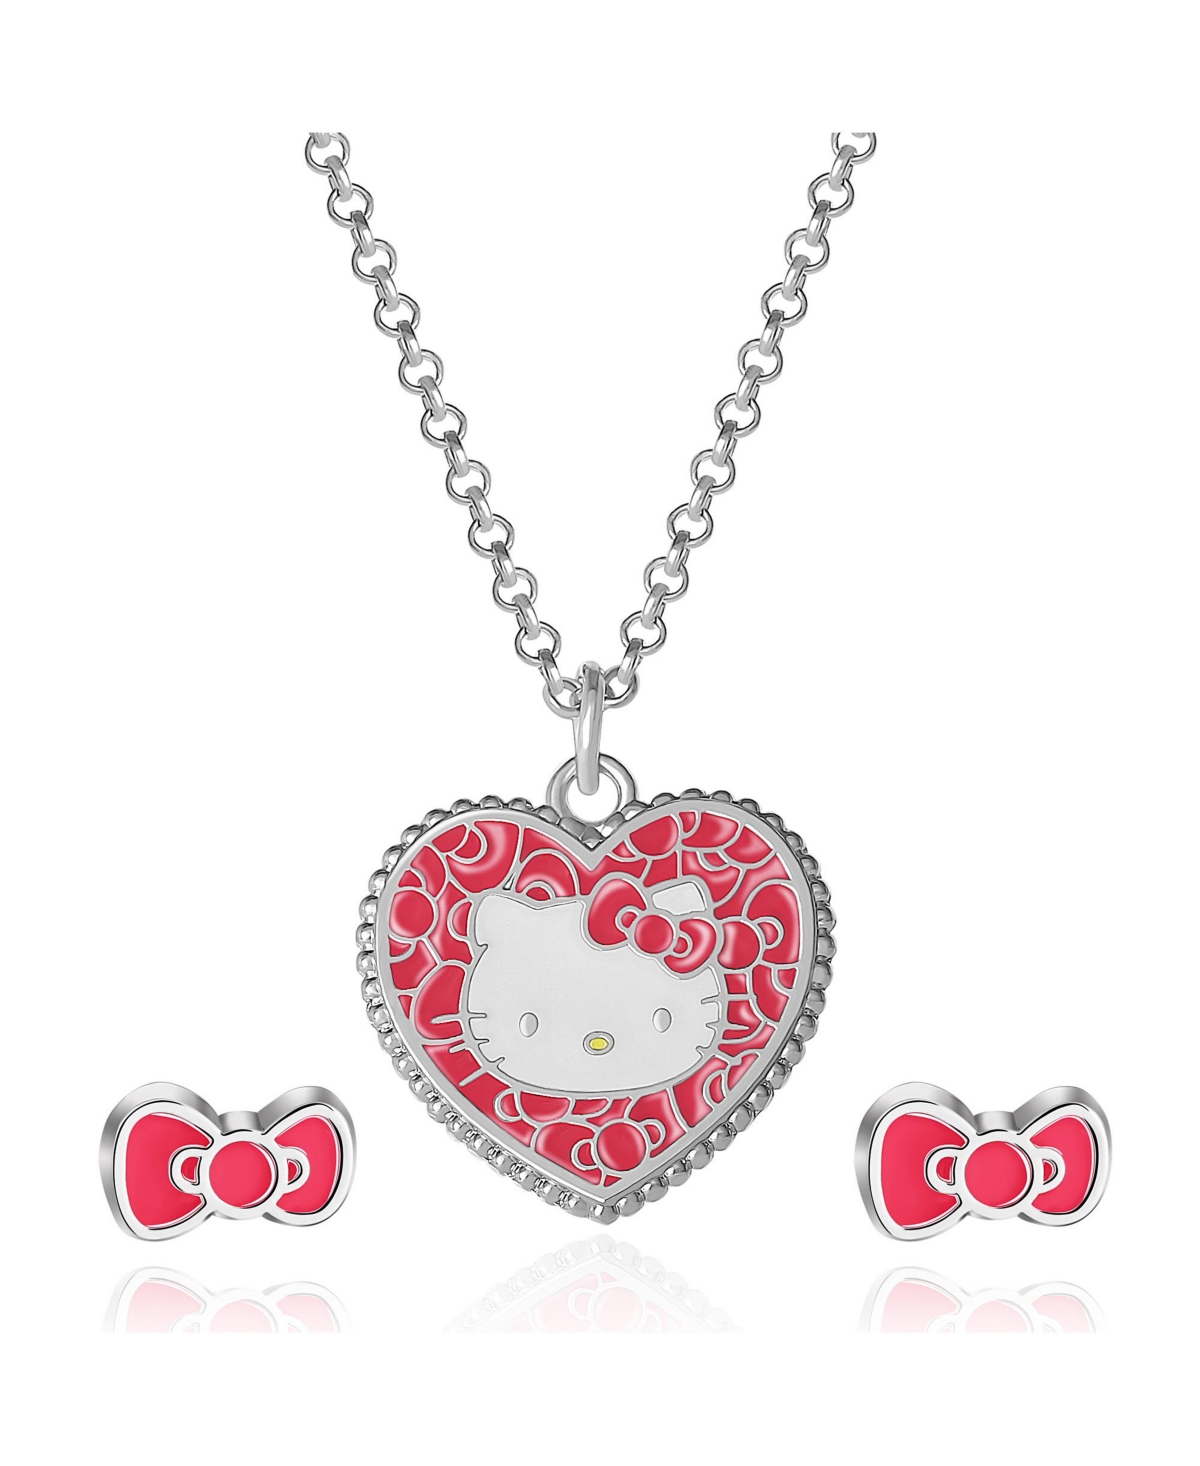 Sanrio Hello Kitty Fashion Jewelry Set, Heart Necklace and Bow Stud Earrings, Officially Licensed - Silver tone, pink